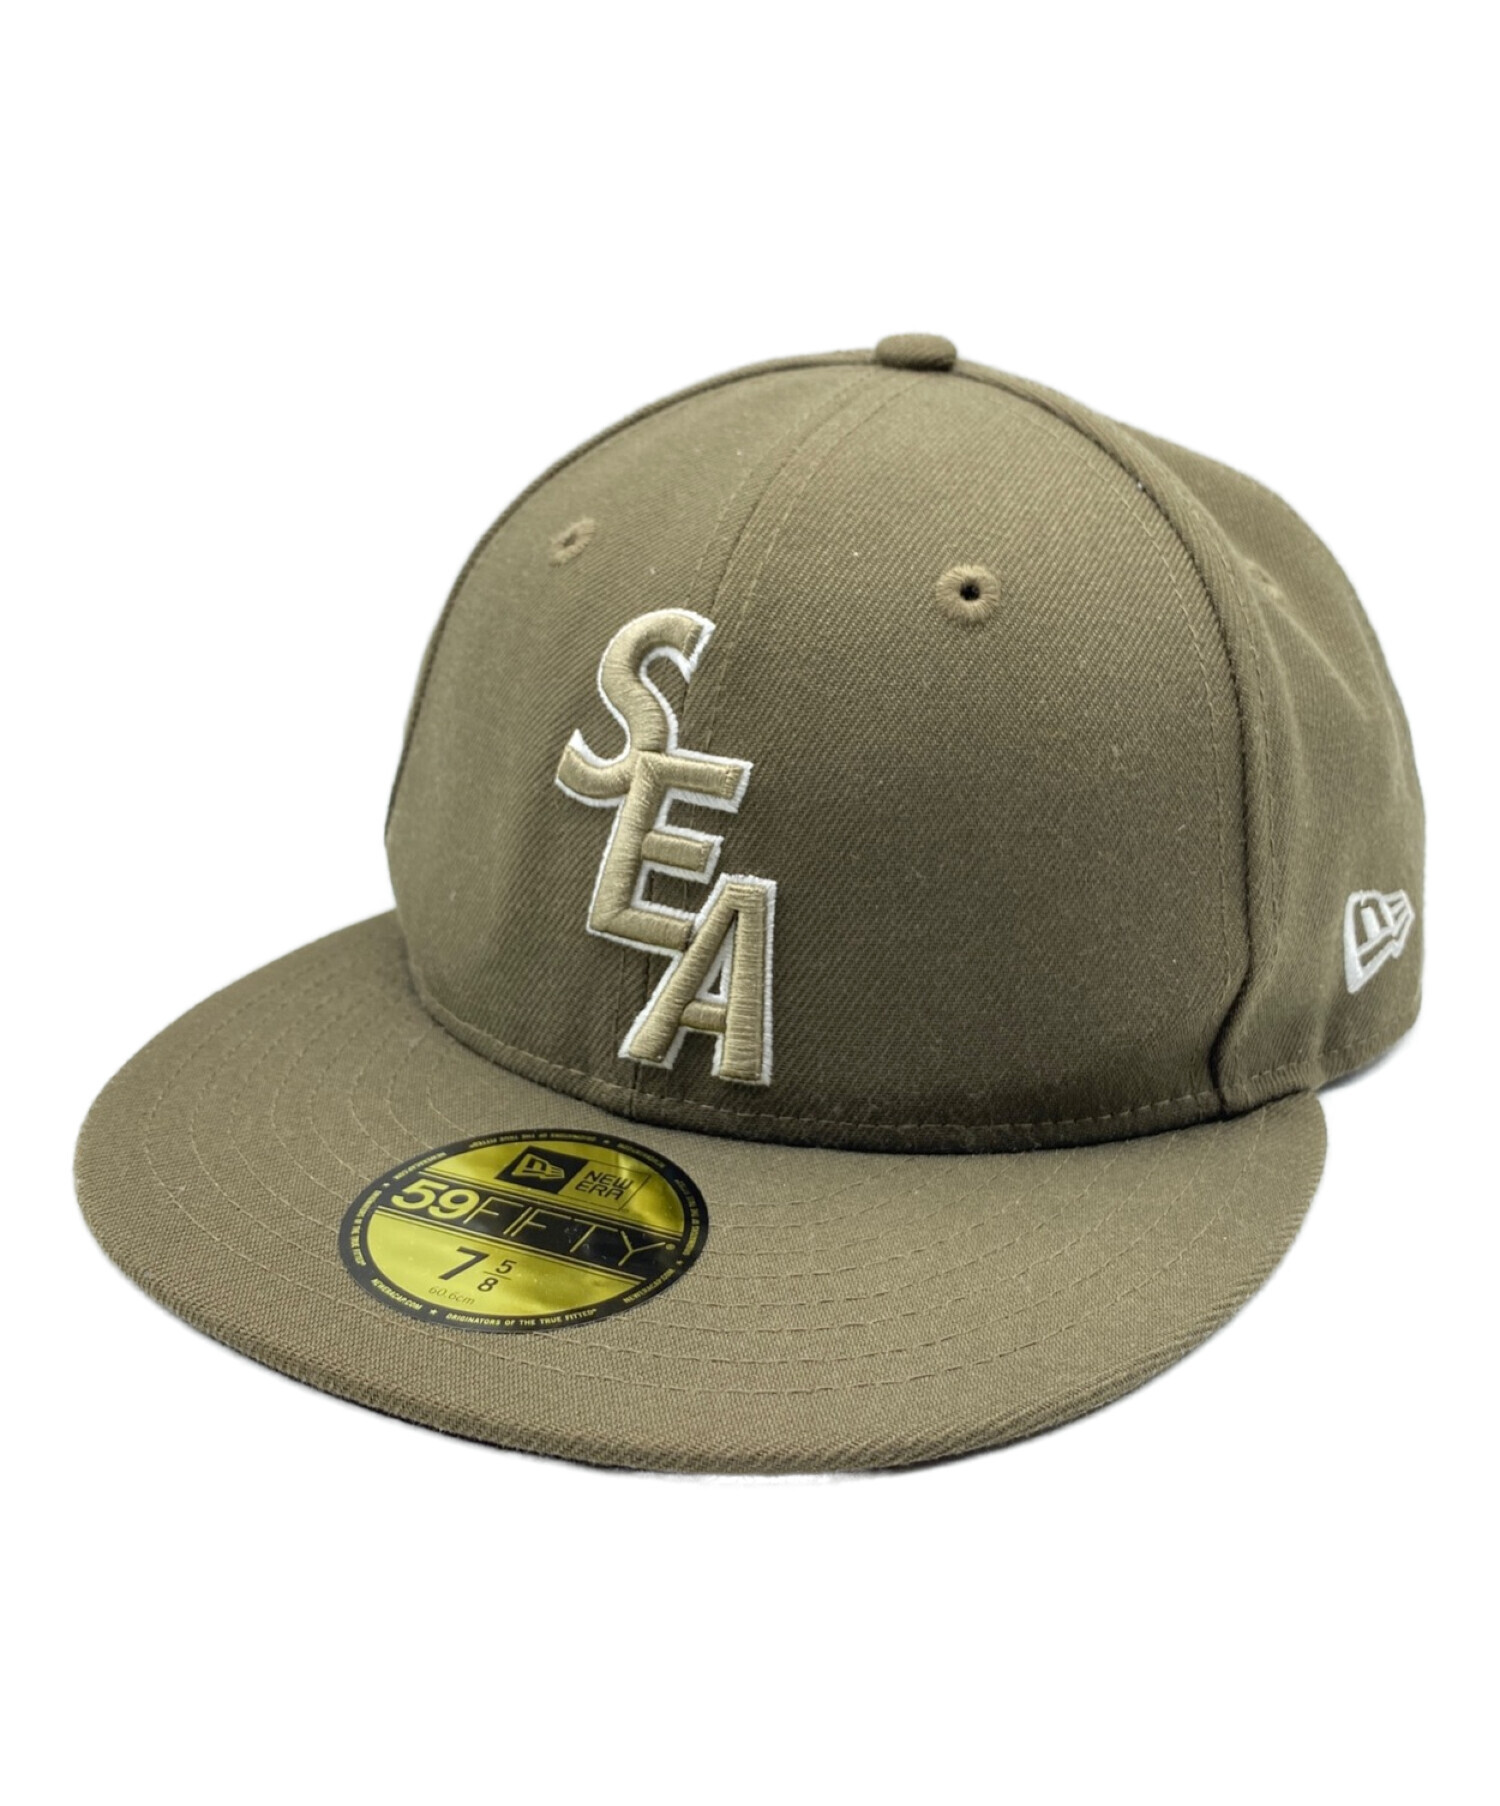 WIND AND SEA x NEW ERA 59FIFTY CAP 7 5/8 - キャップ